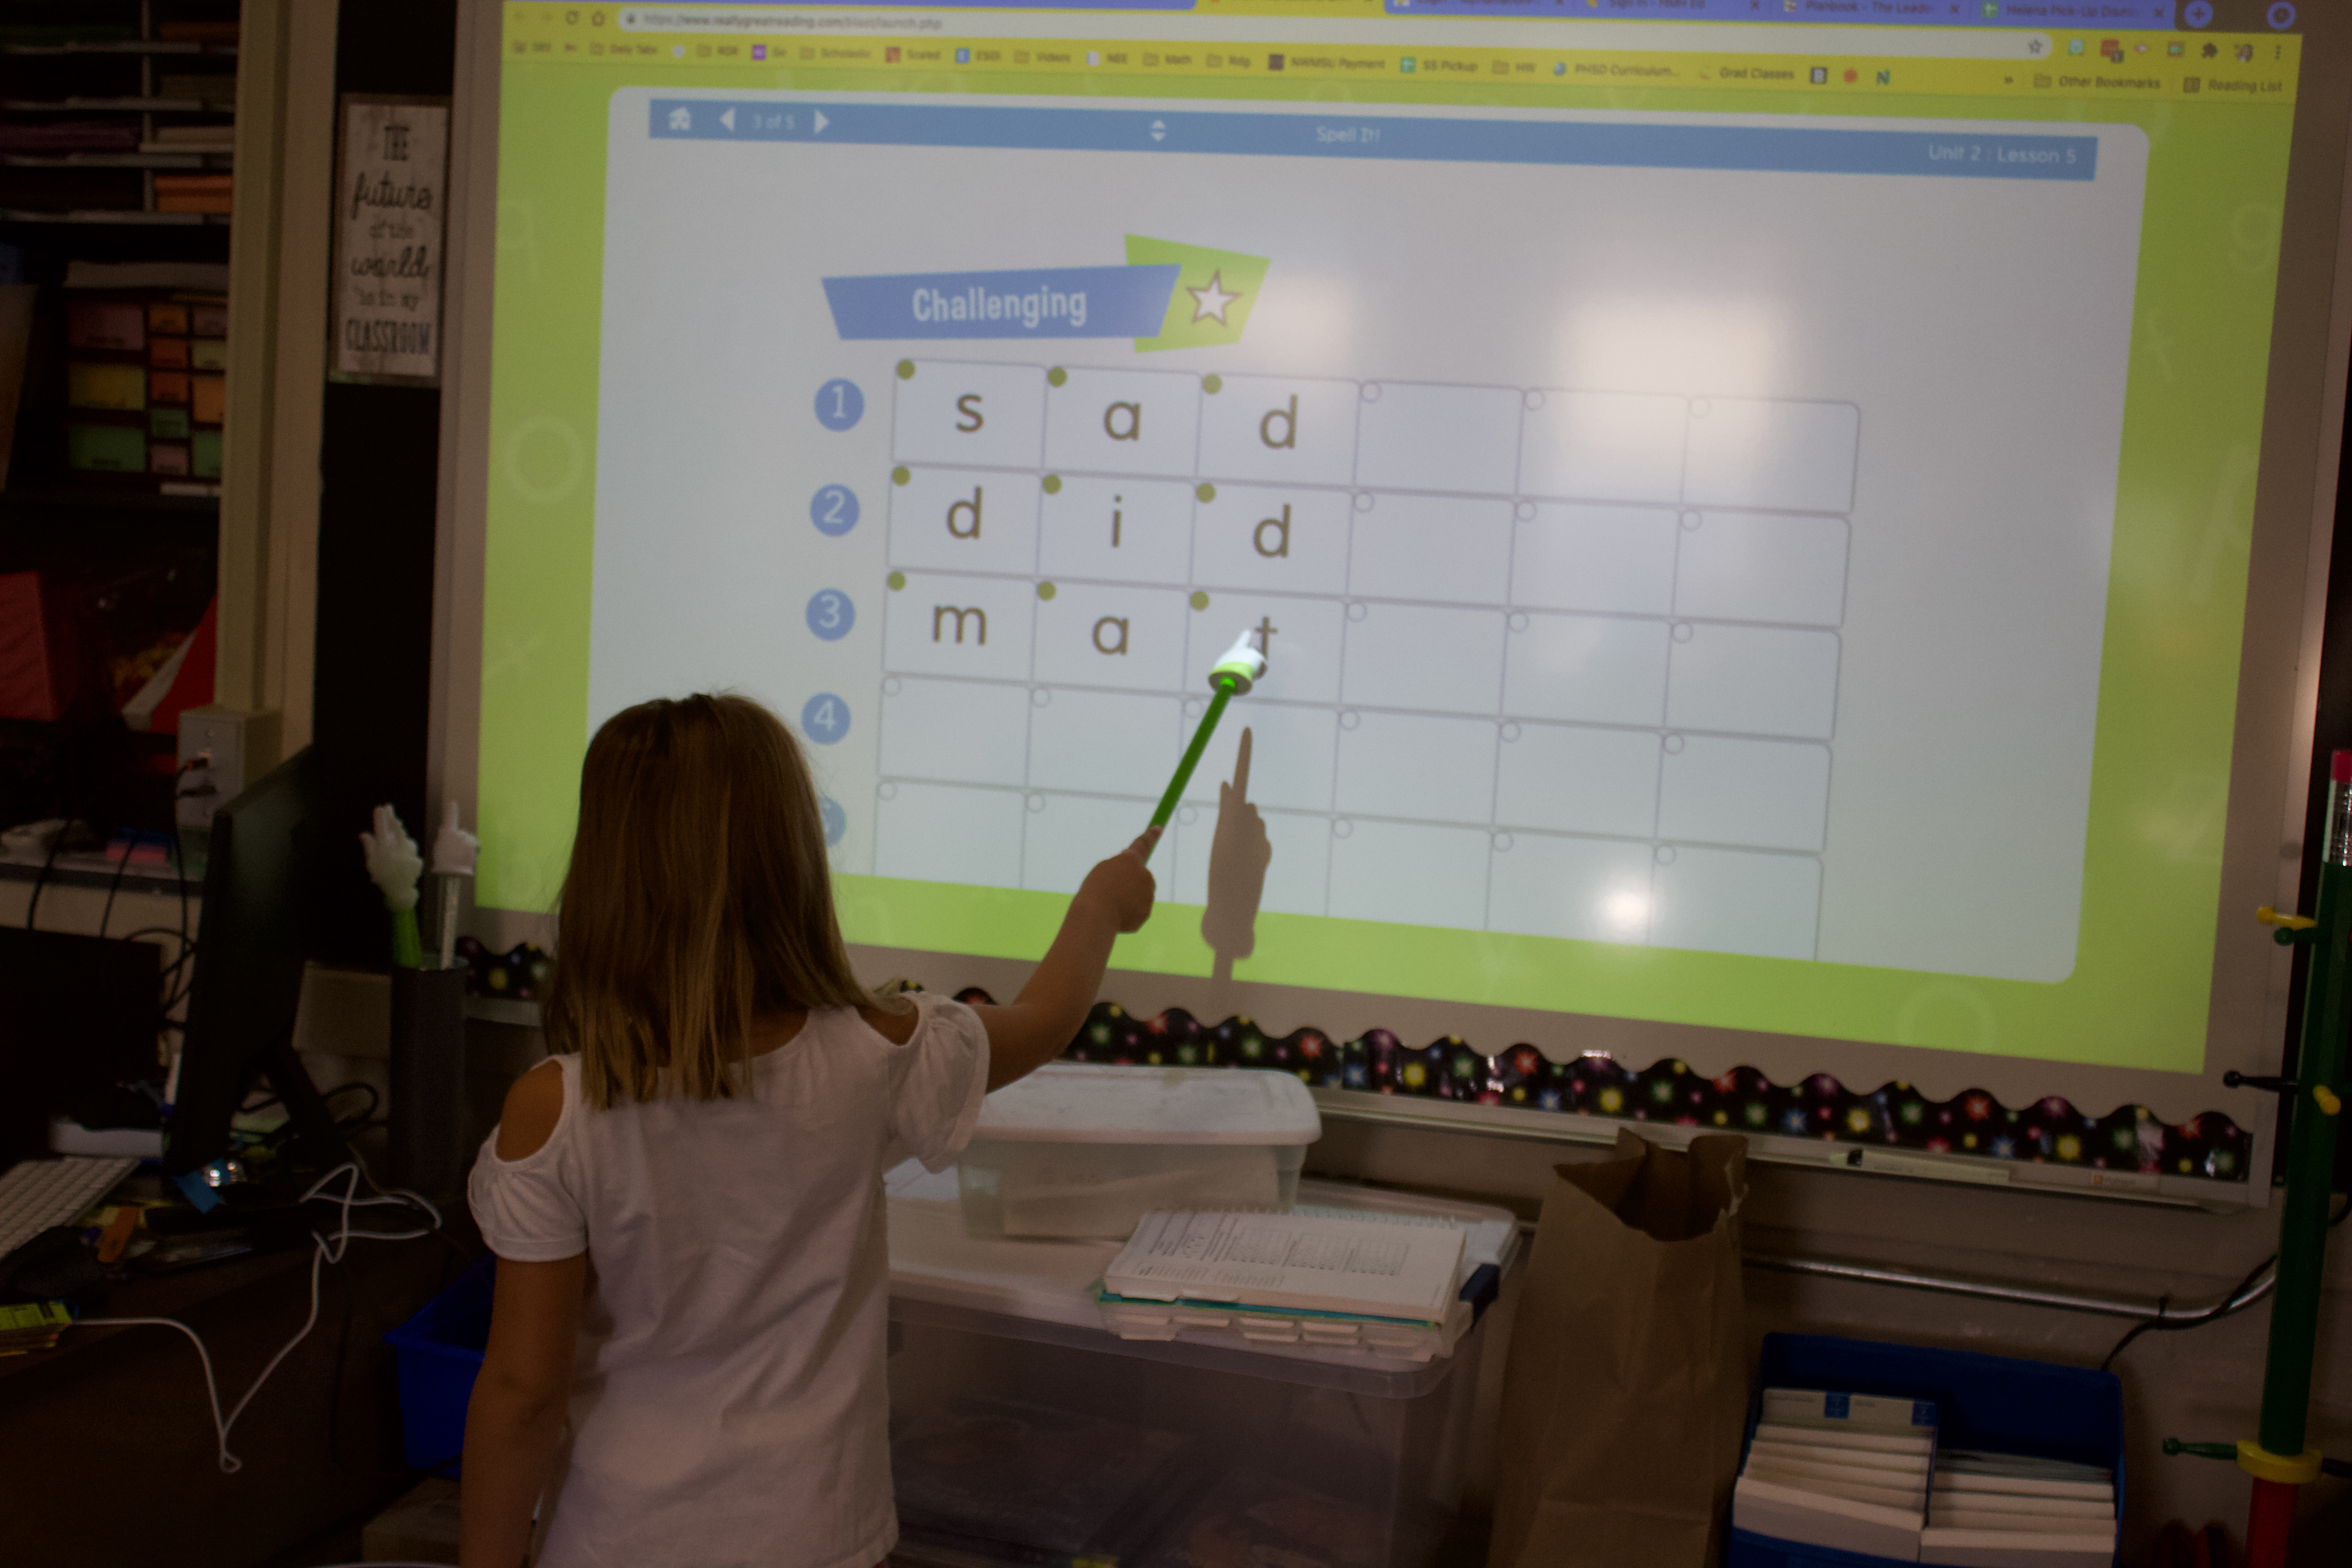 student points at letters in a word on the smart board